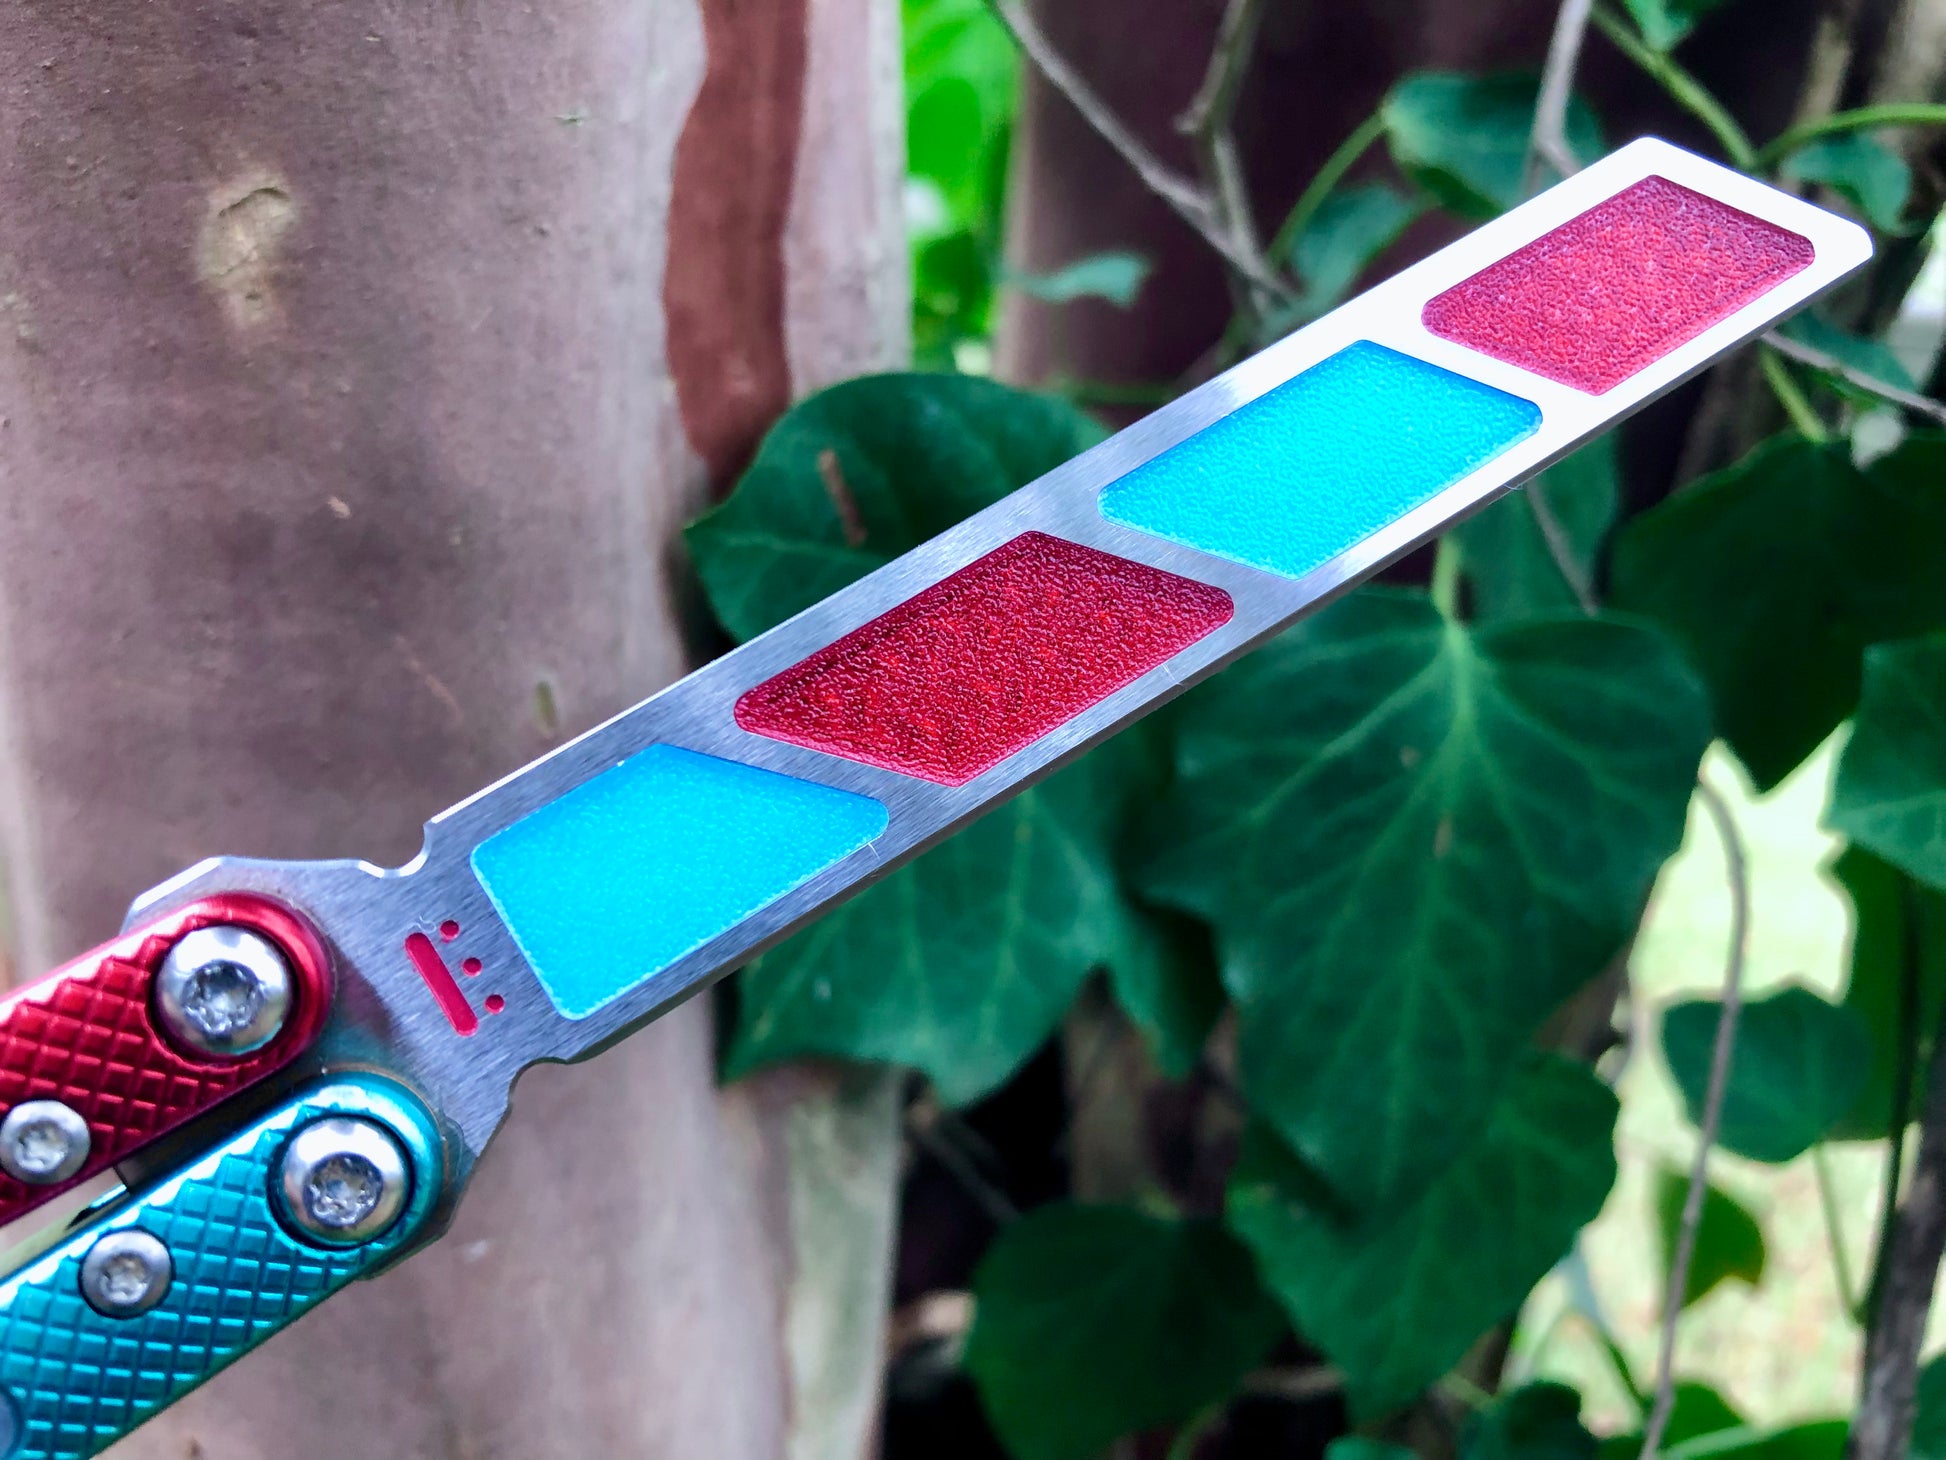 Add blade weight and a pop of color to your NRB Ultralight balisong trainer with these custom-made Zippy blade inserts. The inserts are made of a shatter-proof polyurethane with an edge lip, so they won't fall out on drops. The inserts enable you to modify the balance of your Ultralight and can be used to compensate for the added handle weight from the Zippy handle inlays.